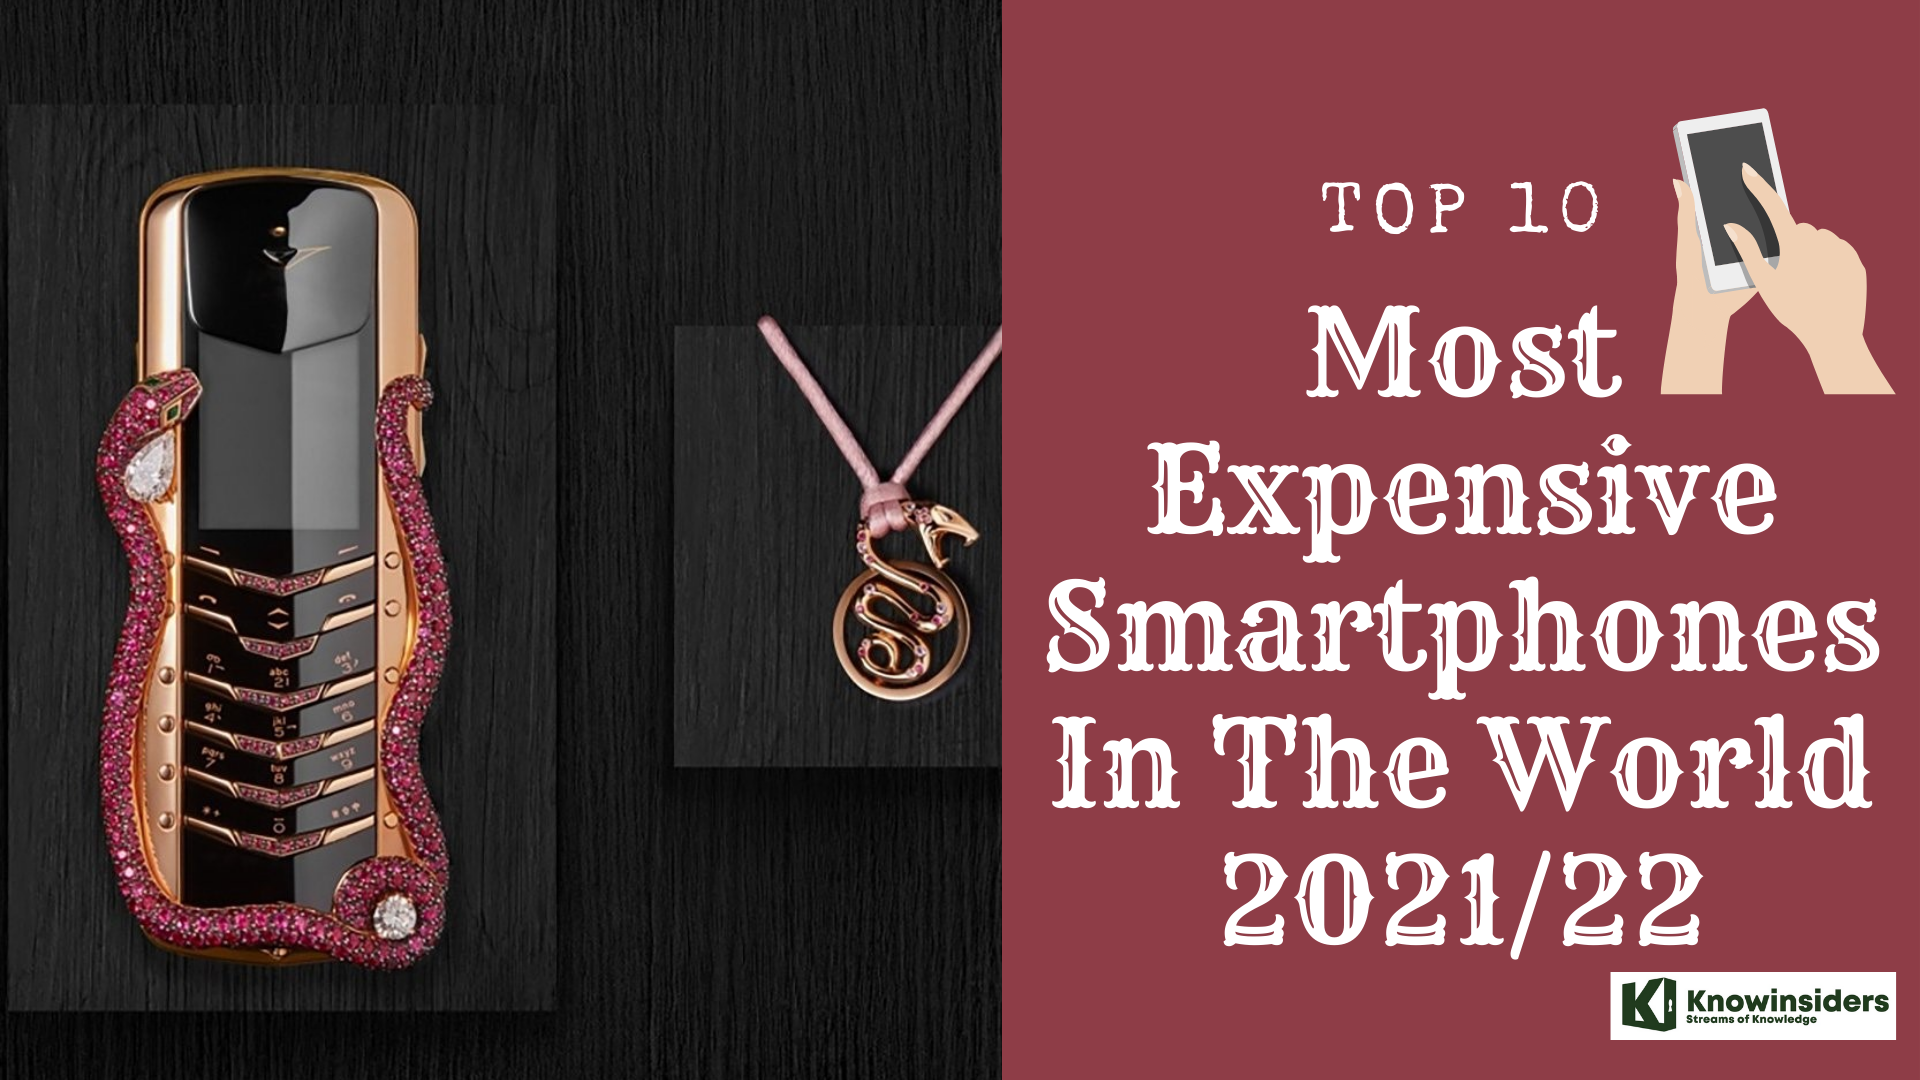 Top 10 Most Expensive Mobilephones In the World 2021/2022